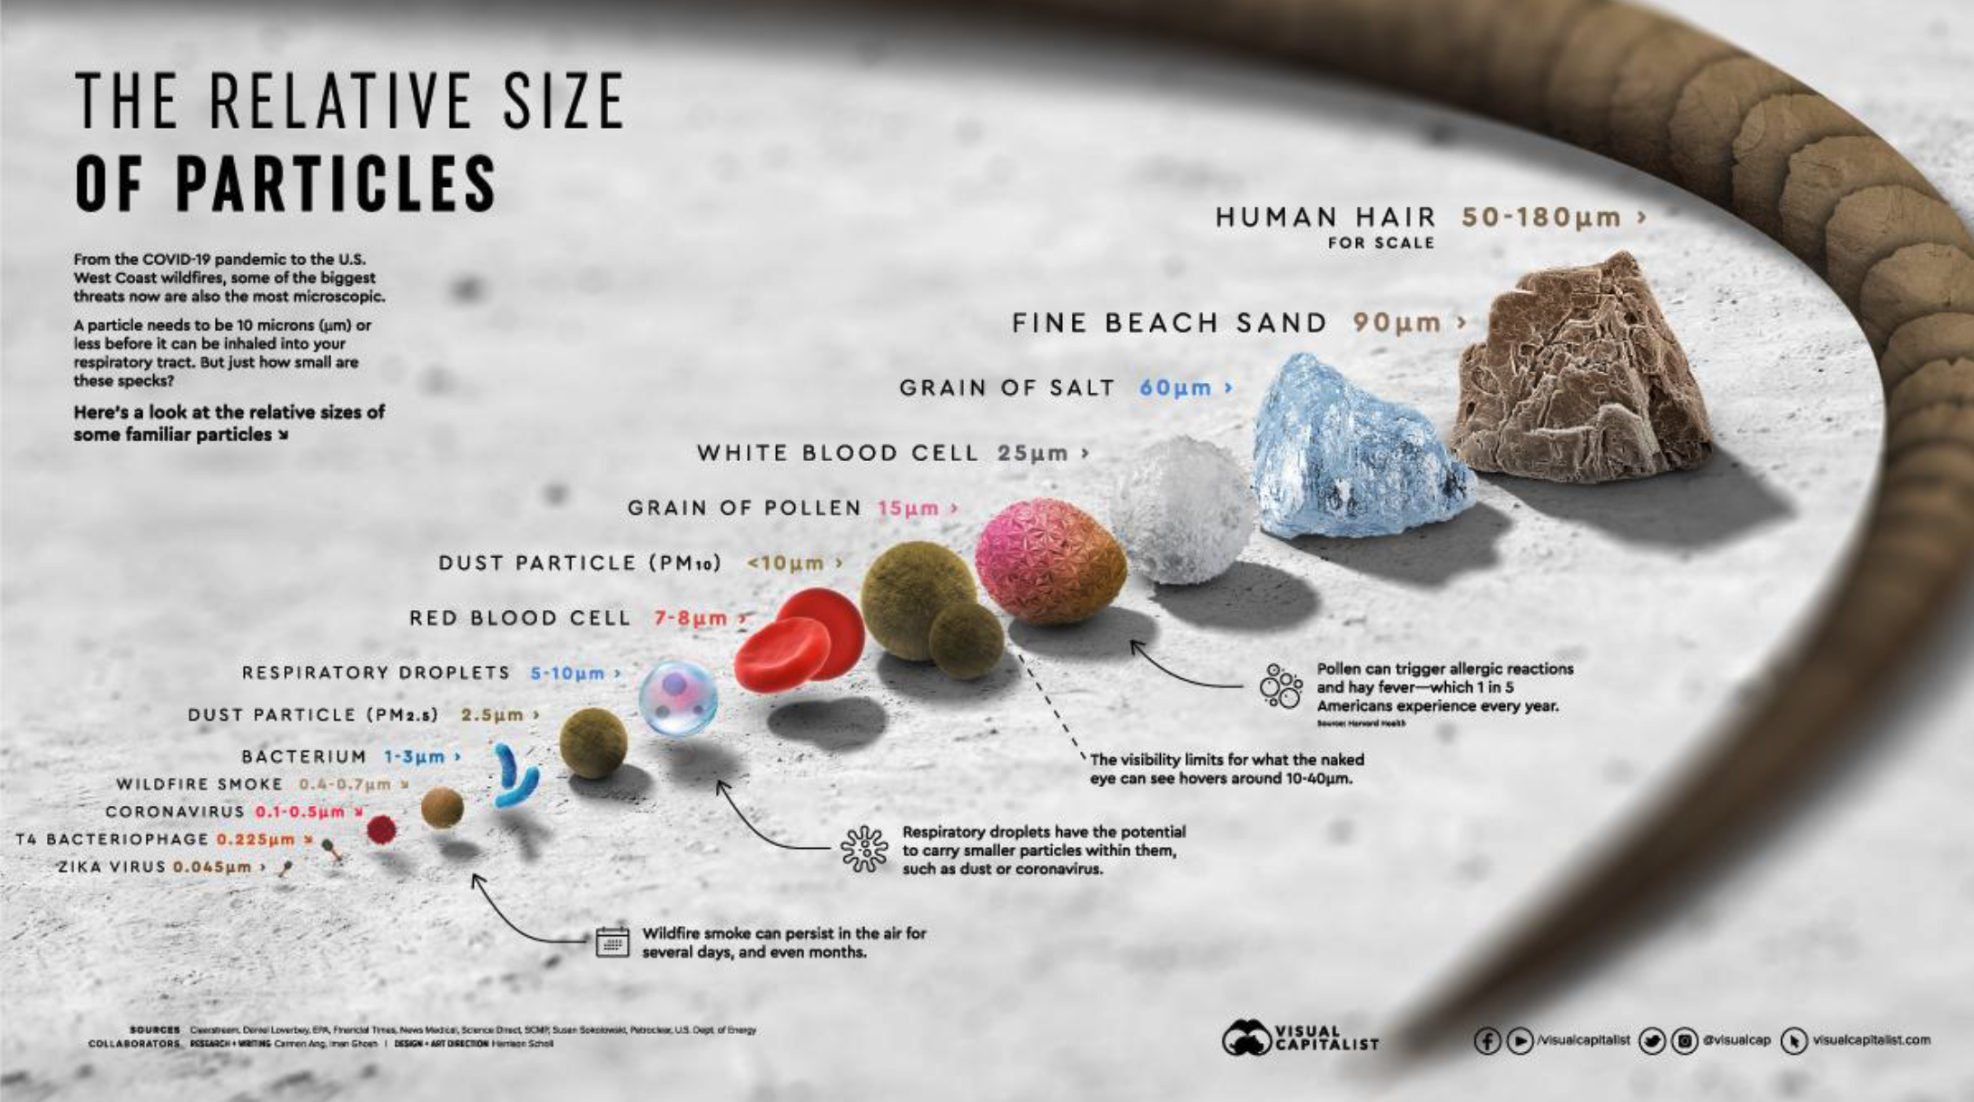 The relative size of particles